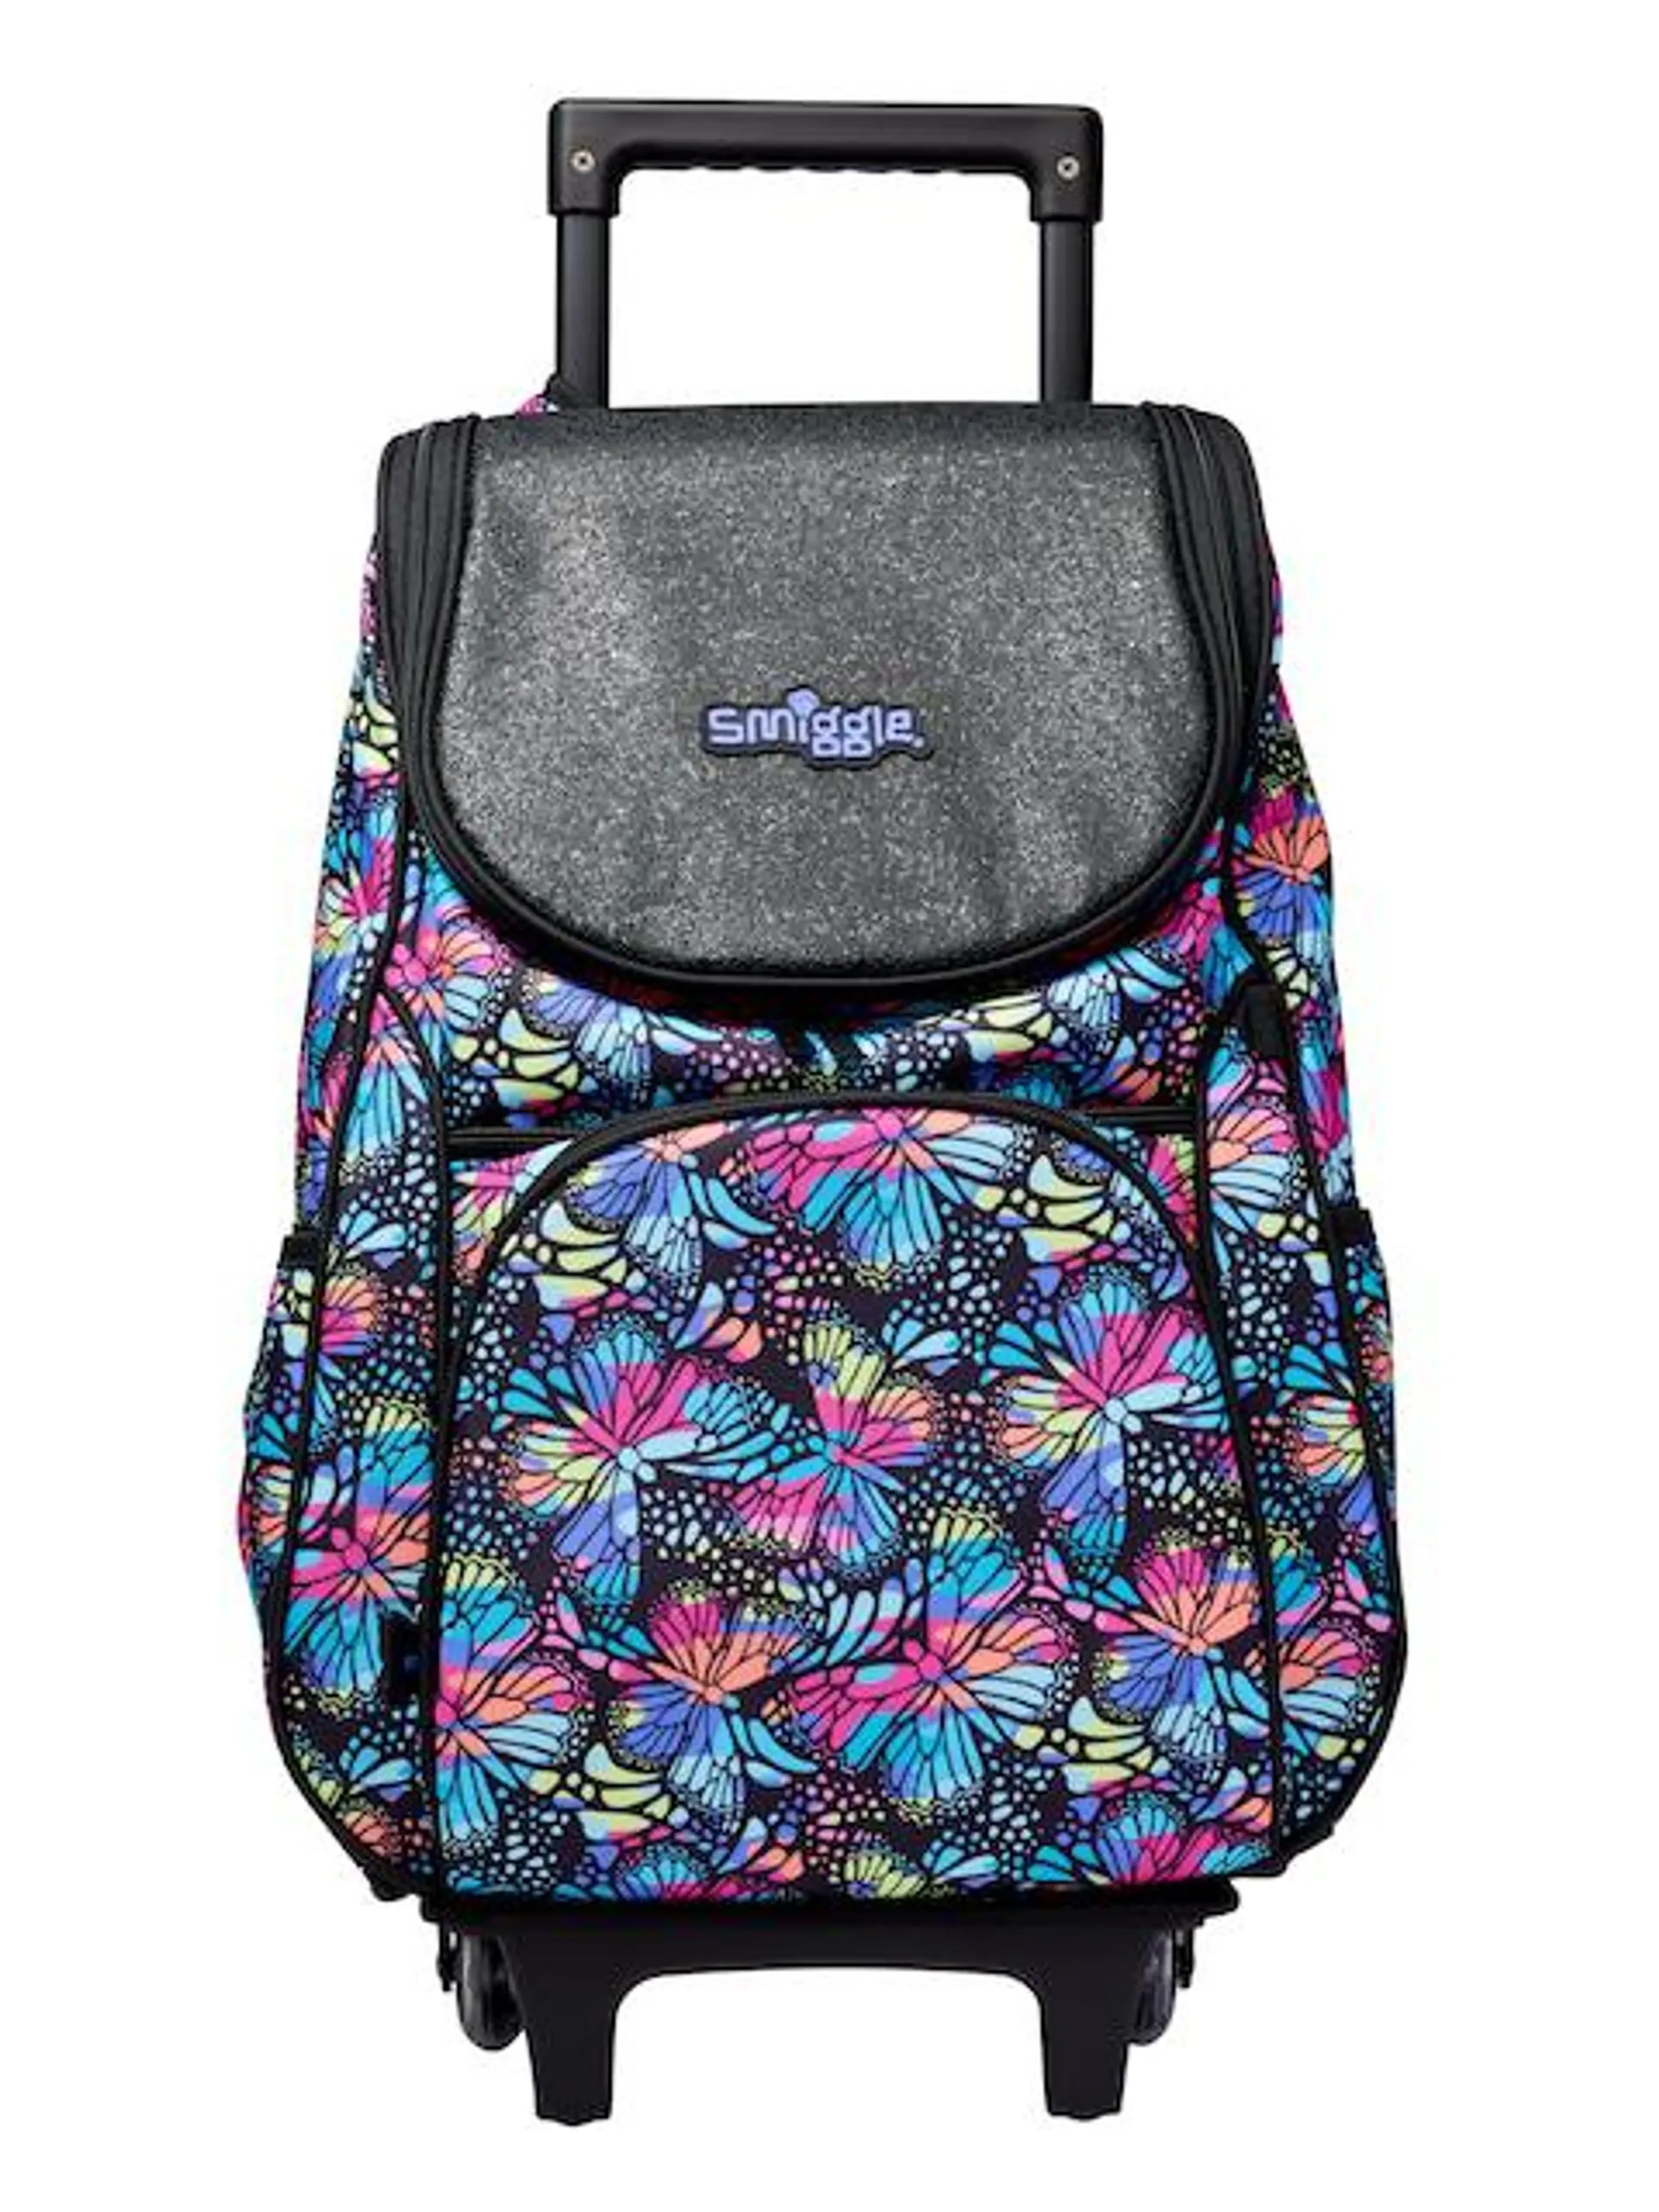 Vivid Access Trolley Backpack